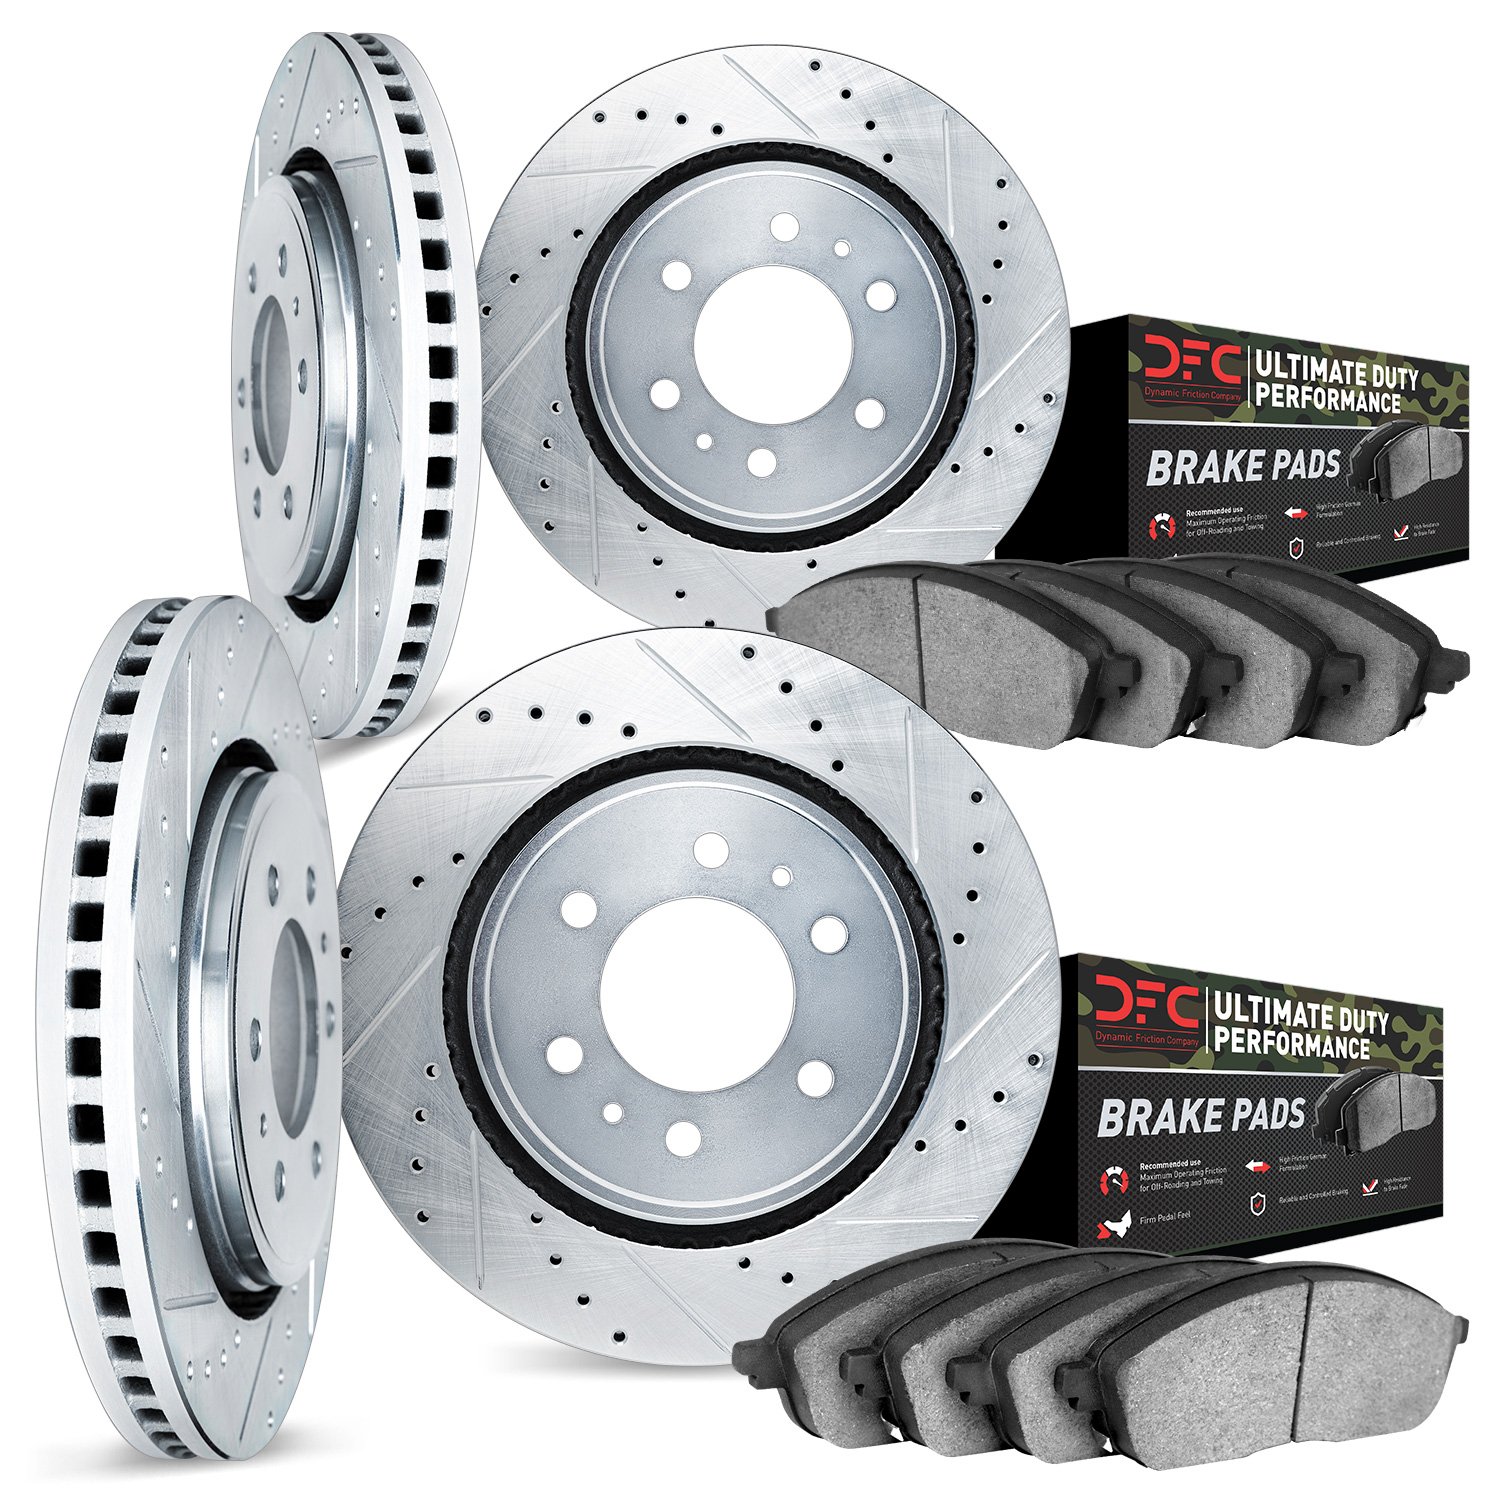 7404-48004 Drilled/Slotted Brake Rotors with Ultimate-Duty Brake Pads Kit [Silver], 2000-2006 GM, Position: Front and Rear